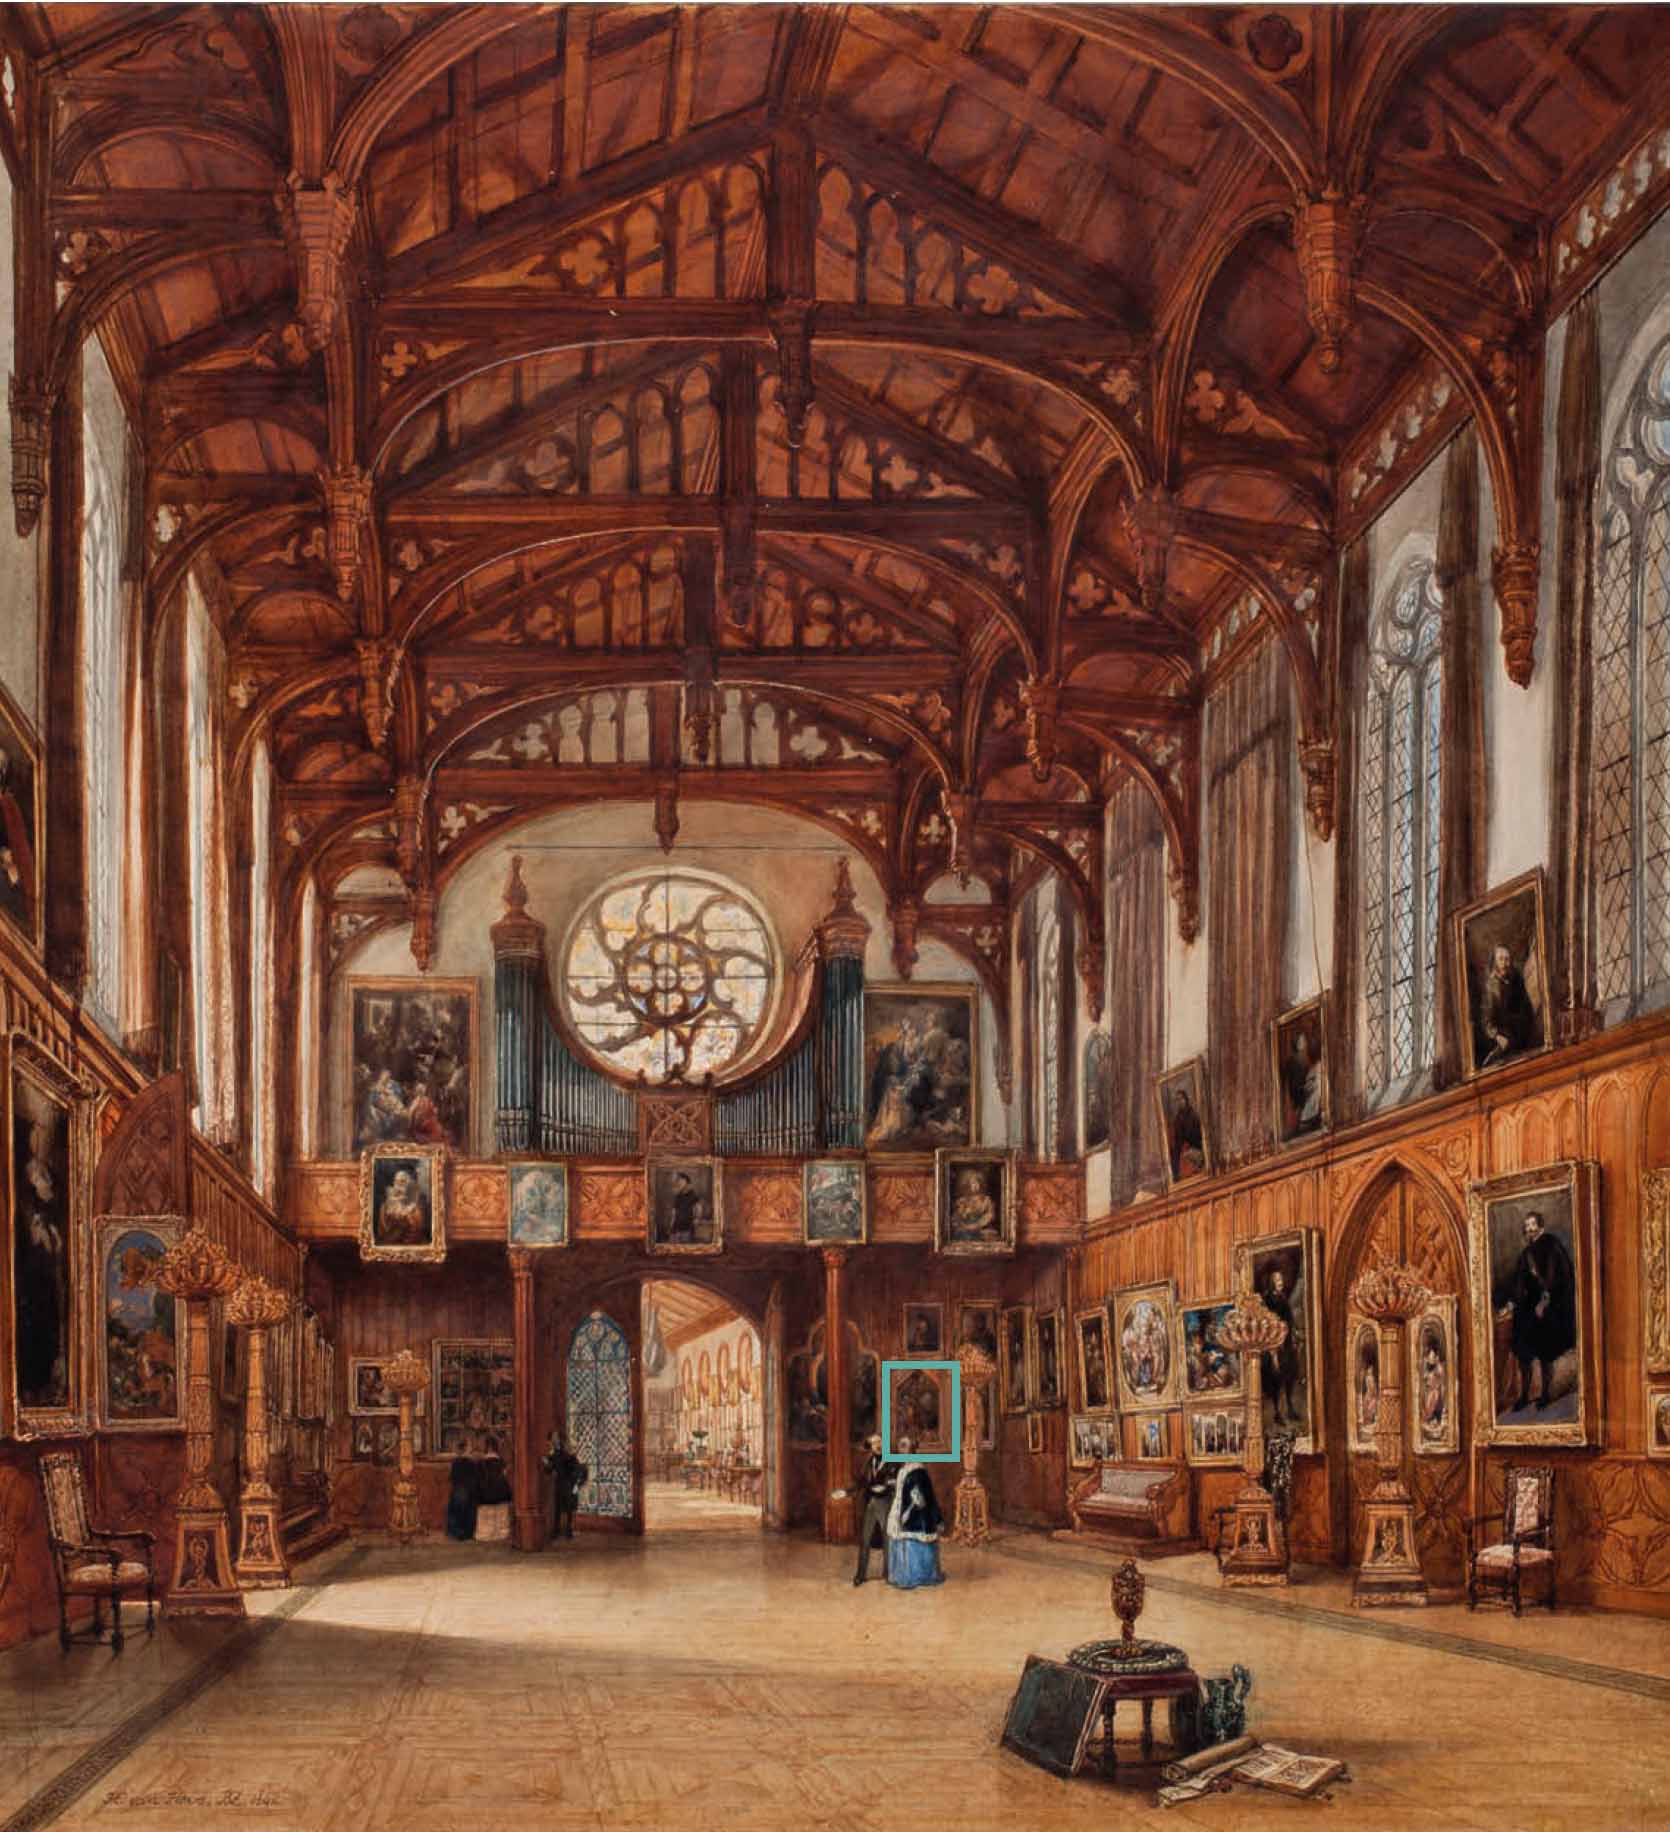 The Art Collection of Willem II, in the Gothic Hall, Kneuterdijk Palace, The Hague. Watercolour by Huib van Hove, 1842 © Royal Collections, the Netherlands, www.koninklijkeverzamelingen.nl